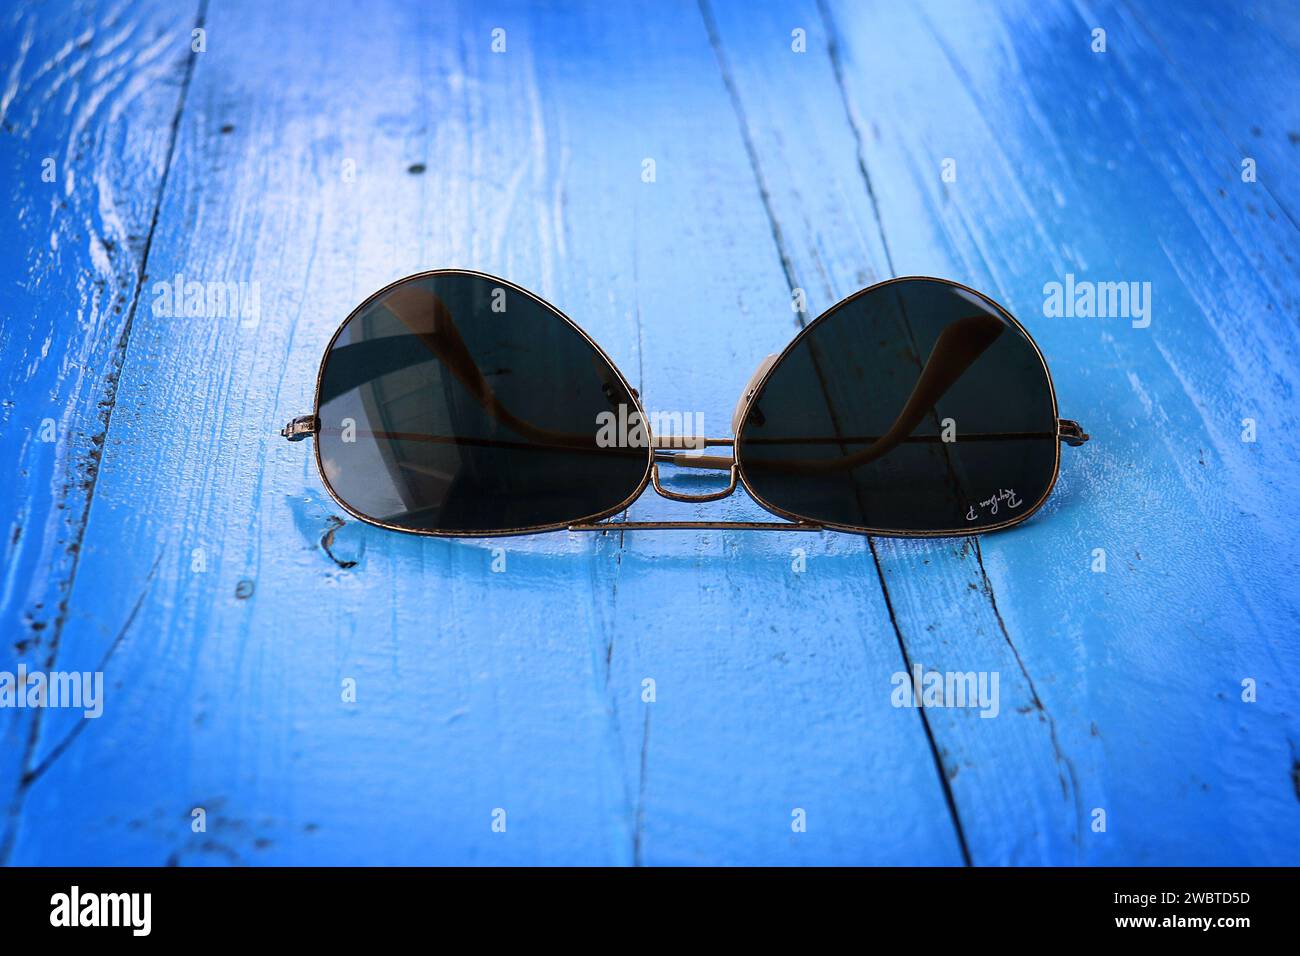 BATROUN, LEBANON - JULY 22, 2018: The Ray-Ban Aviator sunglasses with polarized Lenses. Ray-Ban is founded in 1937 by American company Bausch & Lomb. Stock Photo